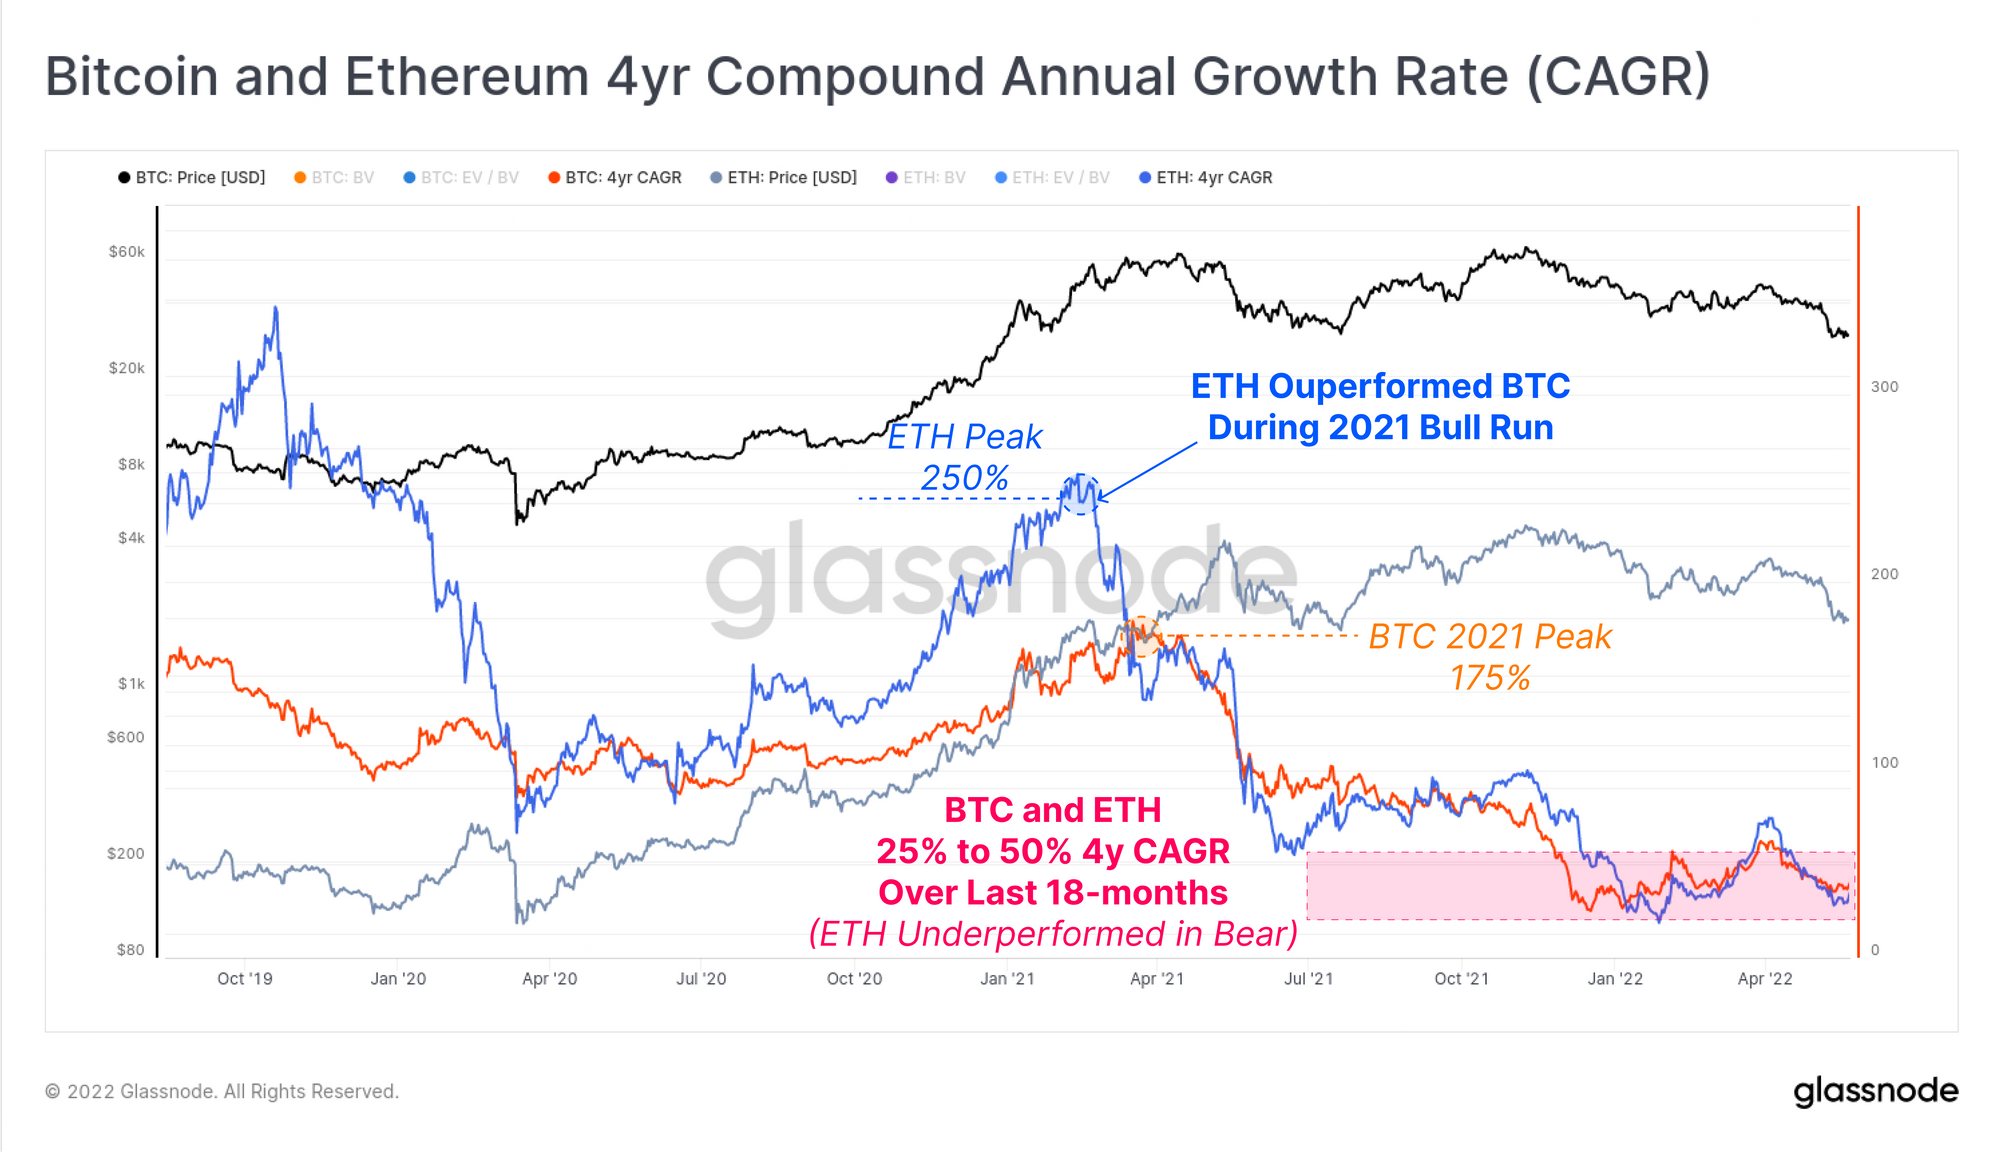 Bitcoin and Ethereum 4yr Compound Annual Growth Rate (CAGR)